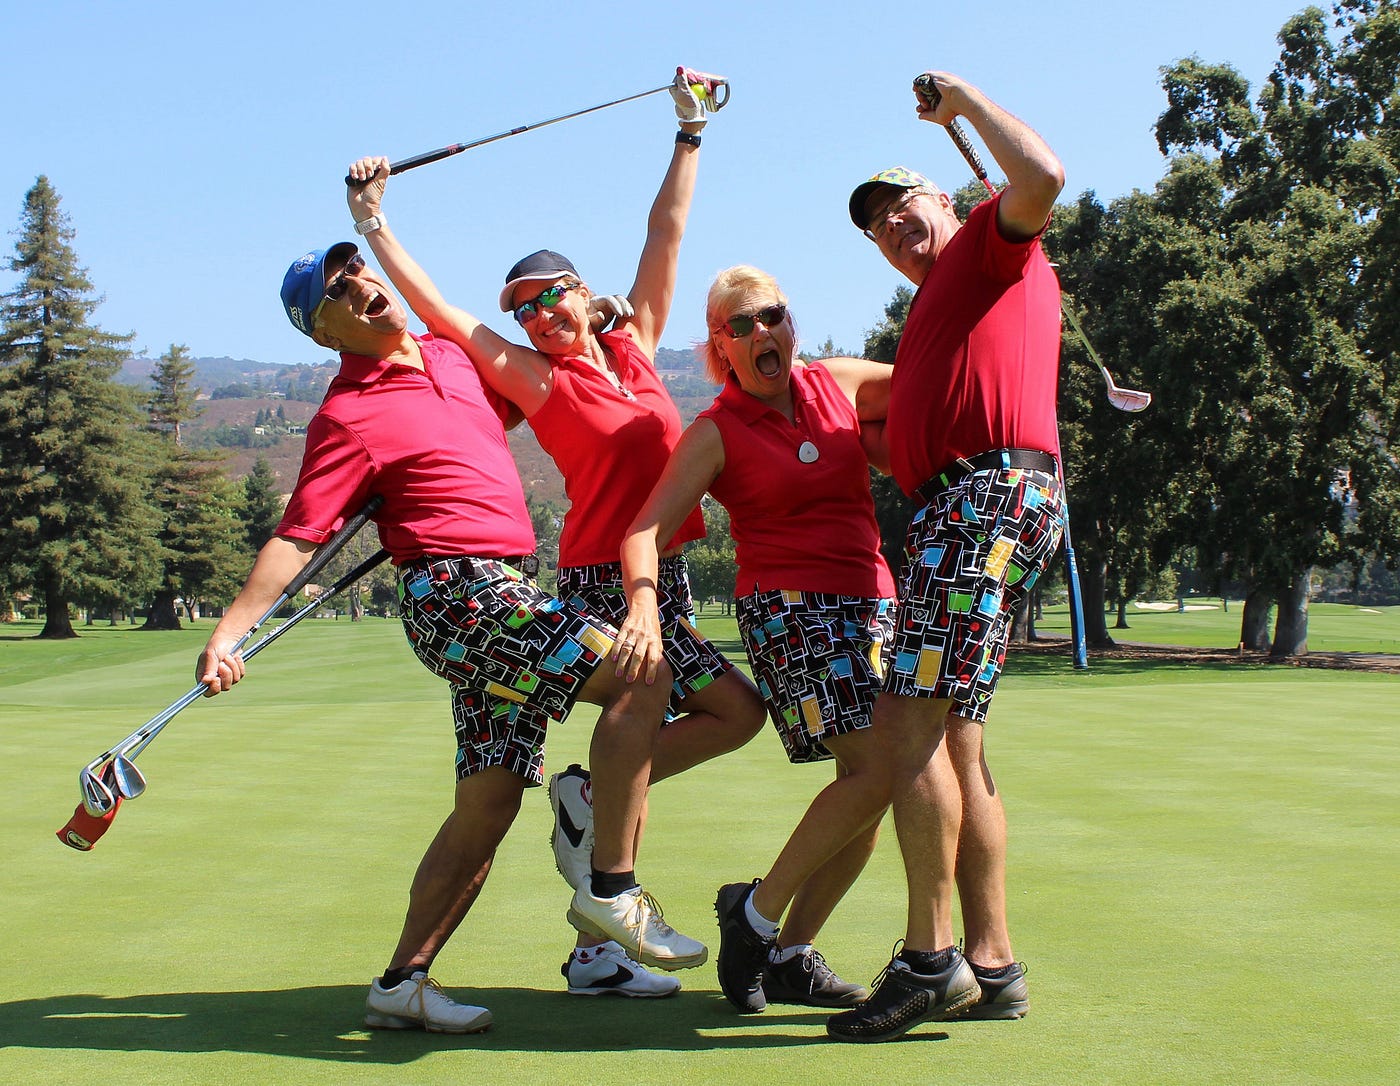 loudmouth golf